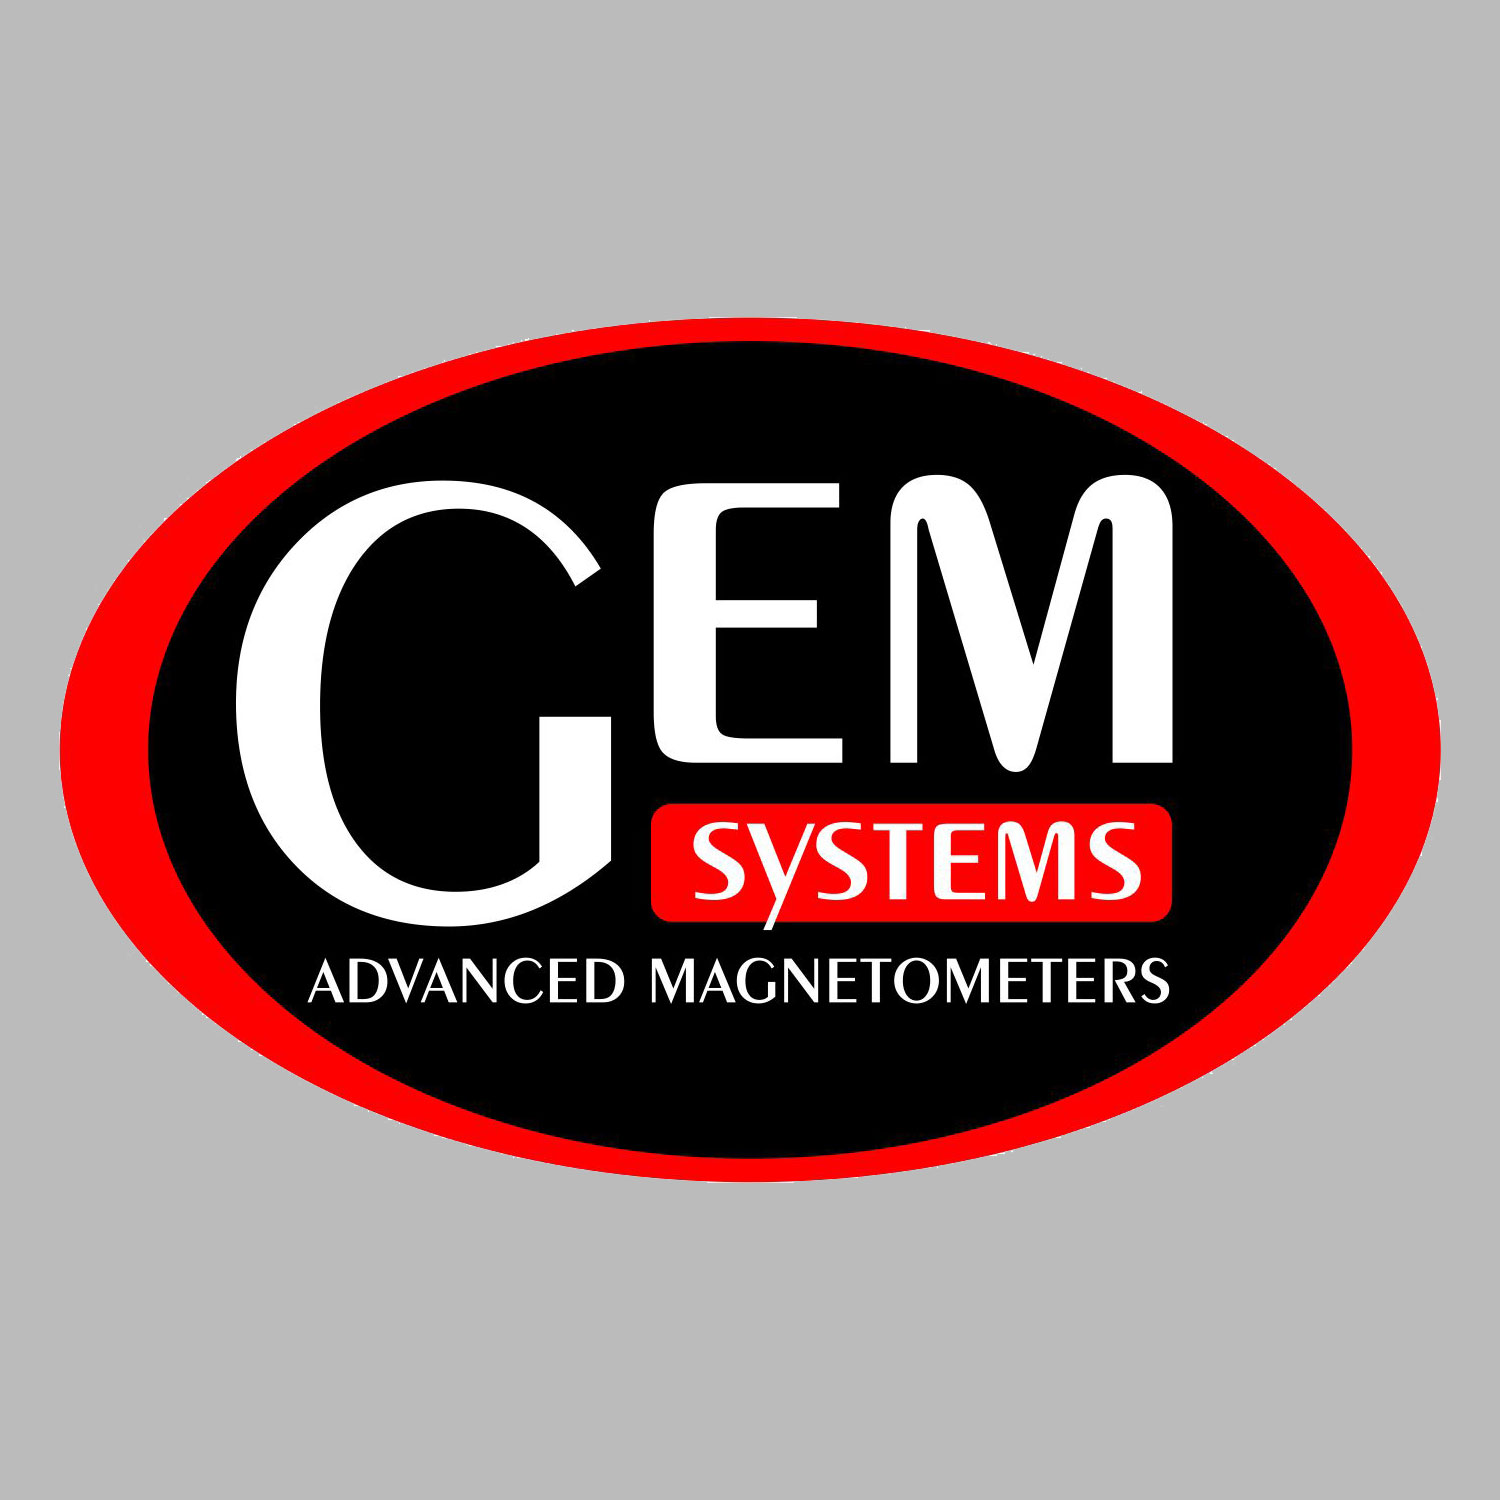 Modern Mag is an official GEM Systems agent.